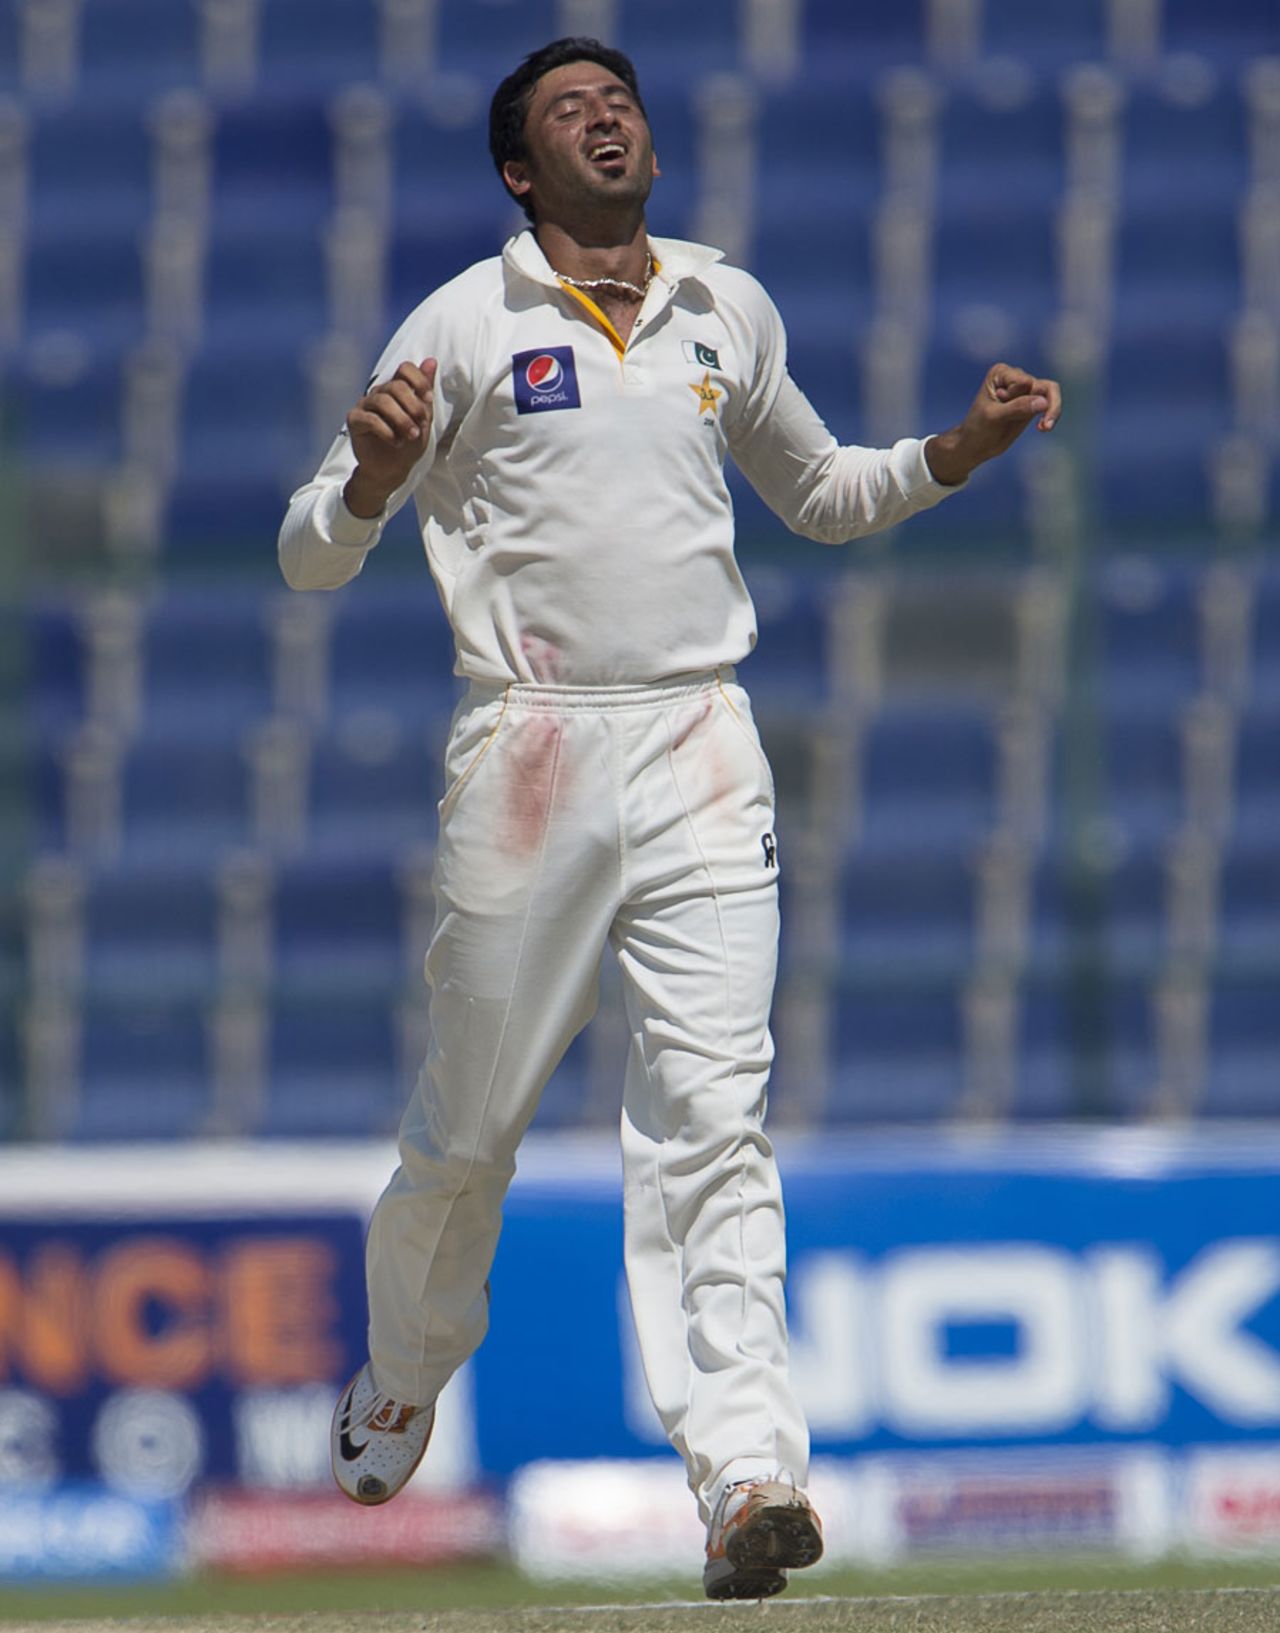 Junaid Khan is relieved after picking up AB de Villiers, Pakistan v South Africa, 1st Test, 4th day, Abu Dhabi, October 17, 2013